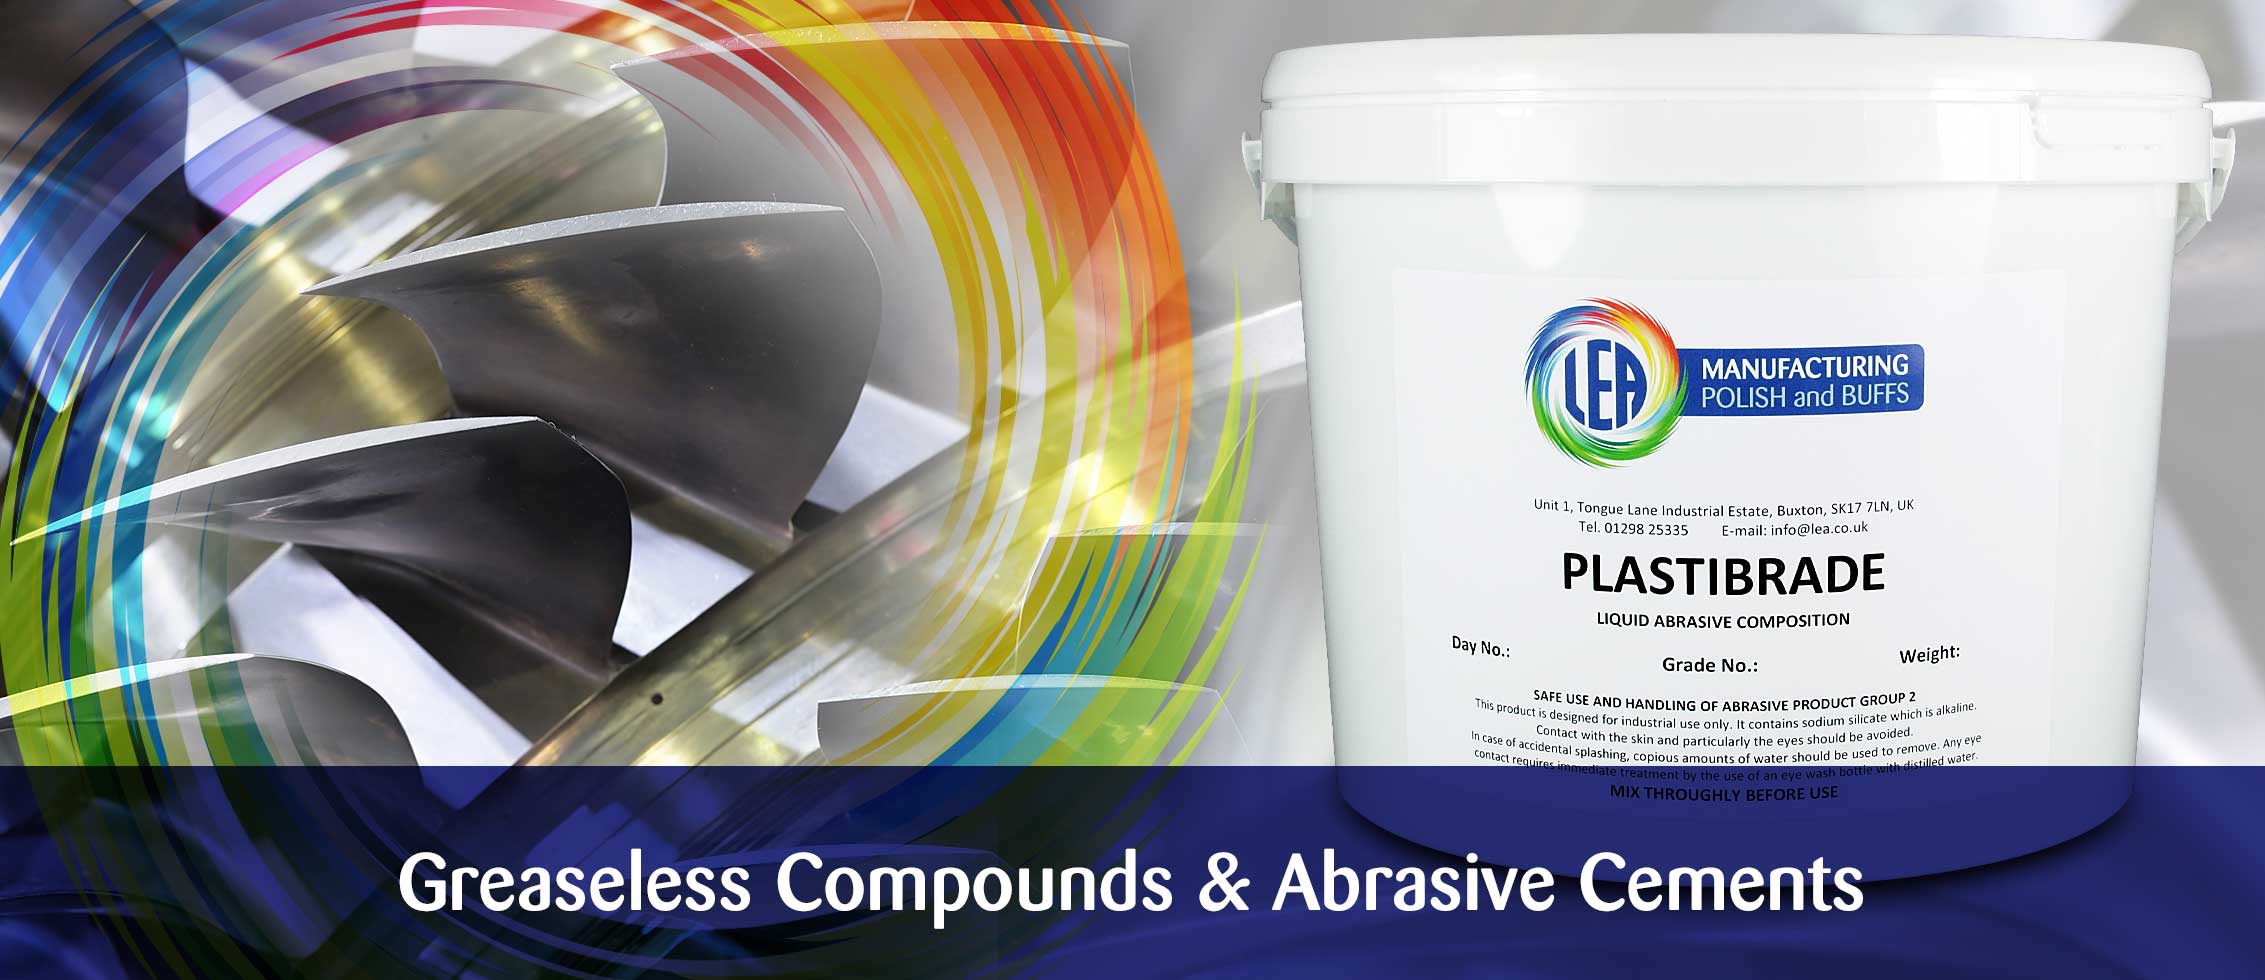 Greaseless Compunds and Abrasive Cements